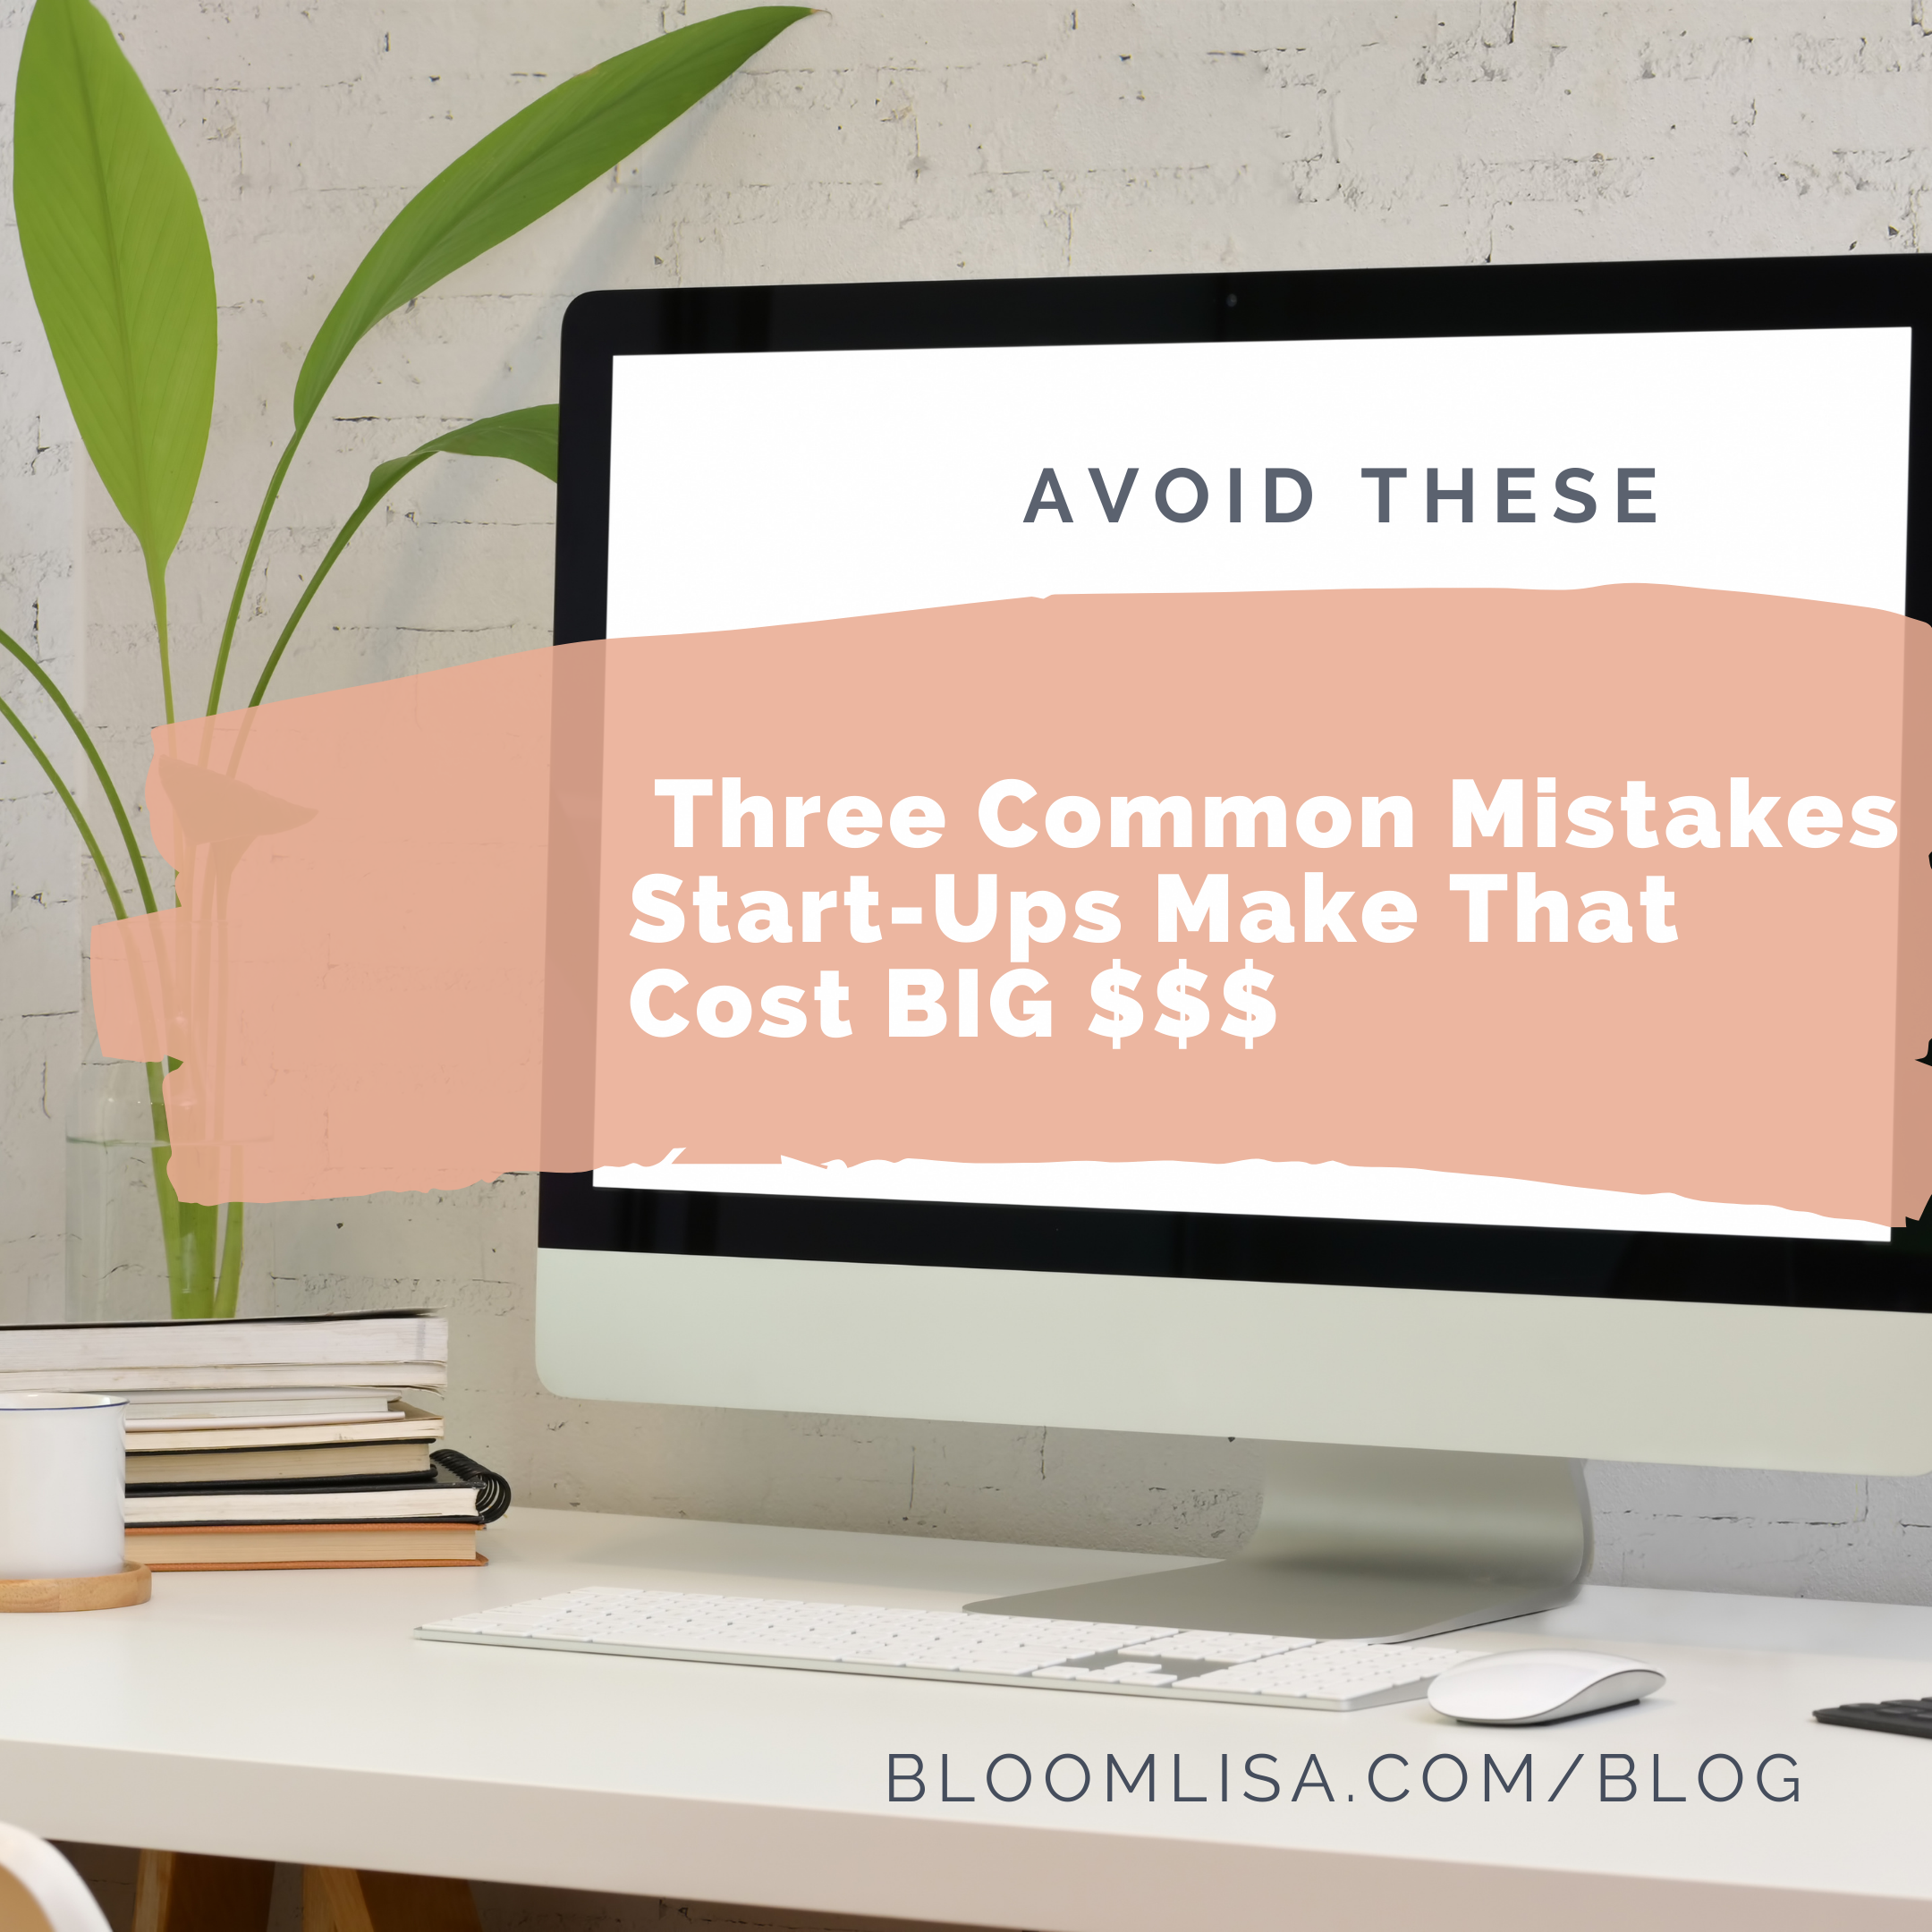 Acoid these common mistakes that cost start ups big money - by @BloomLisa